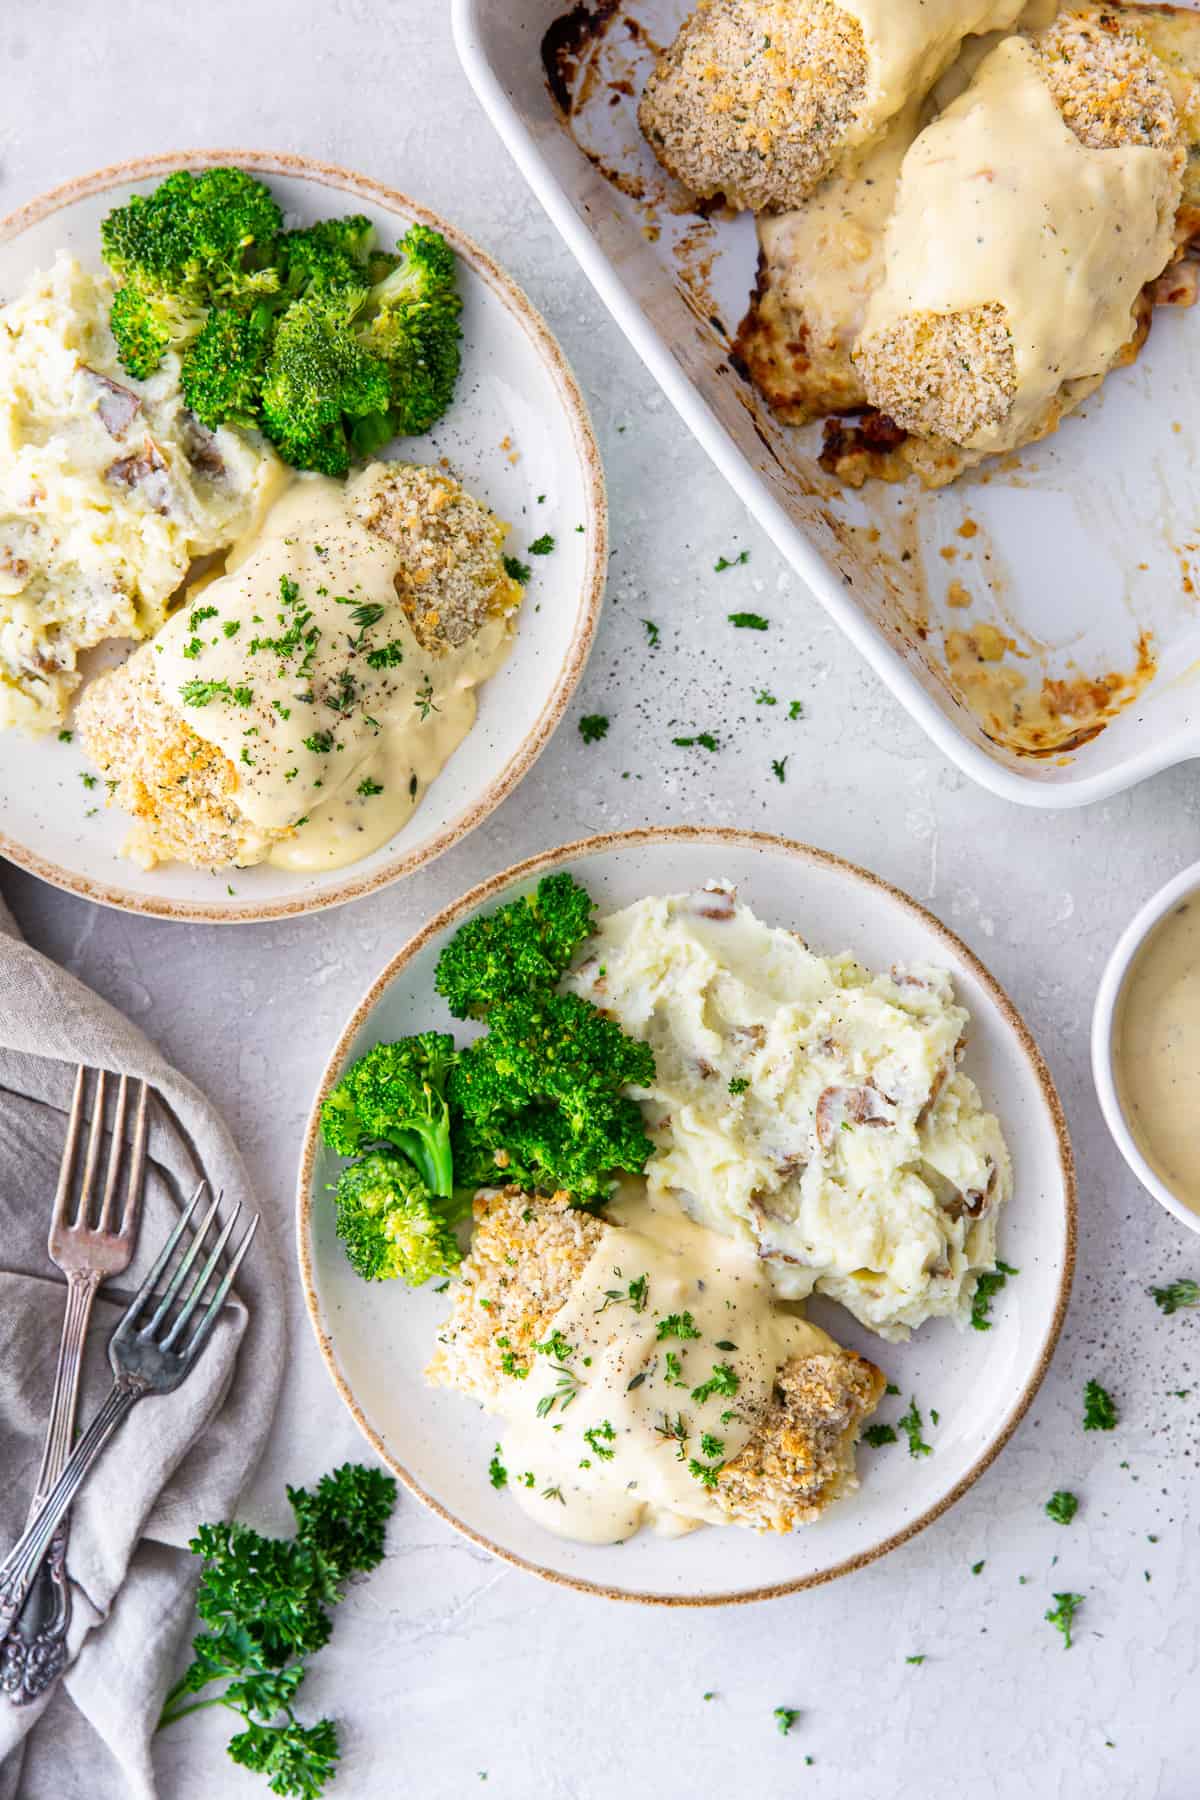 A top down shot of chicken with a creamy sauce on plates with mashed potatoes and broccoli.